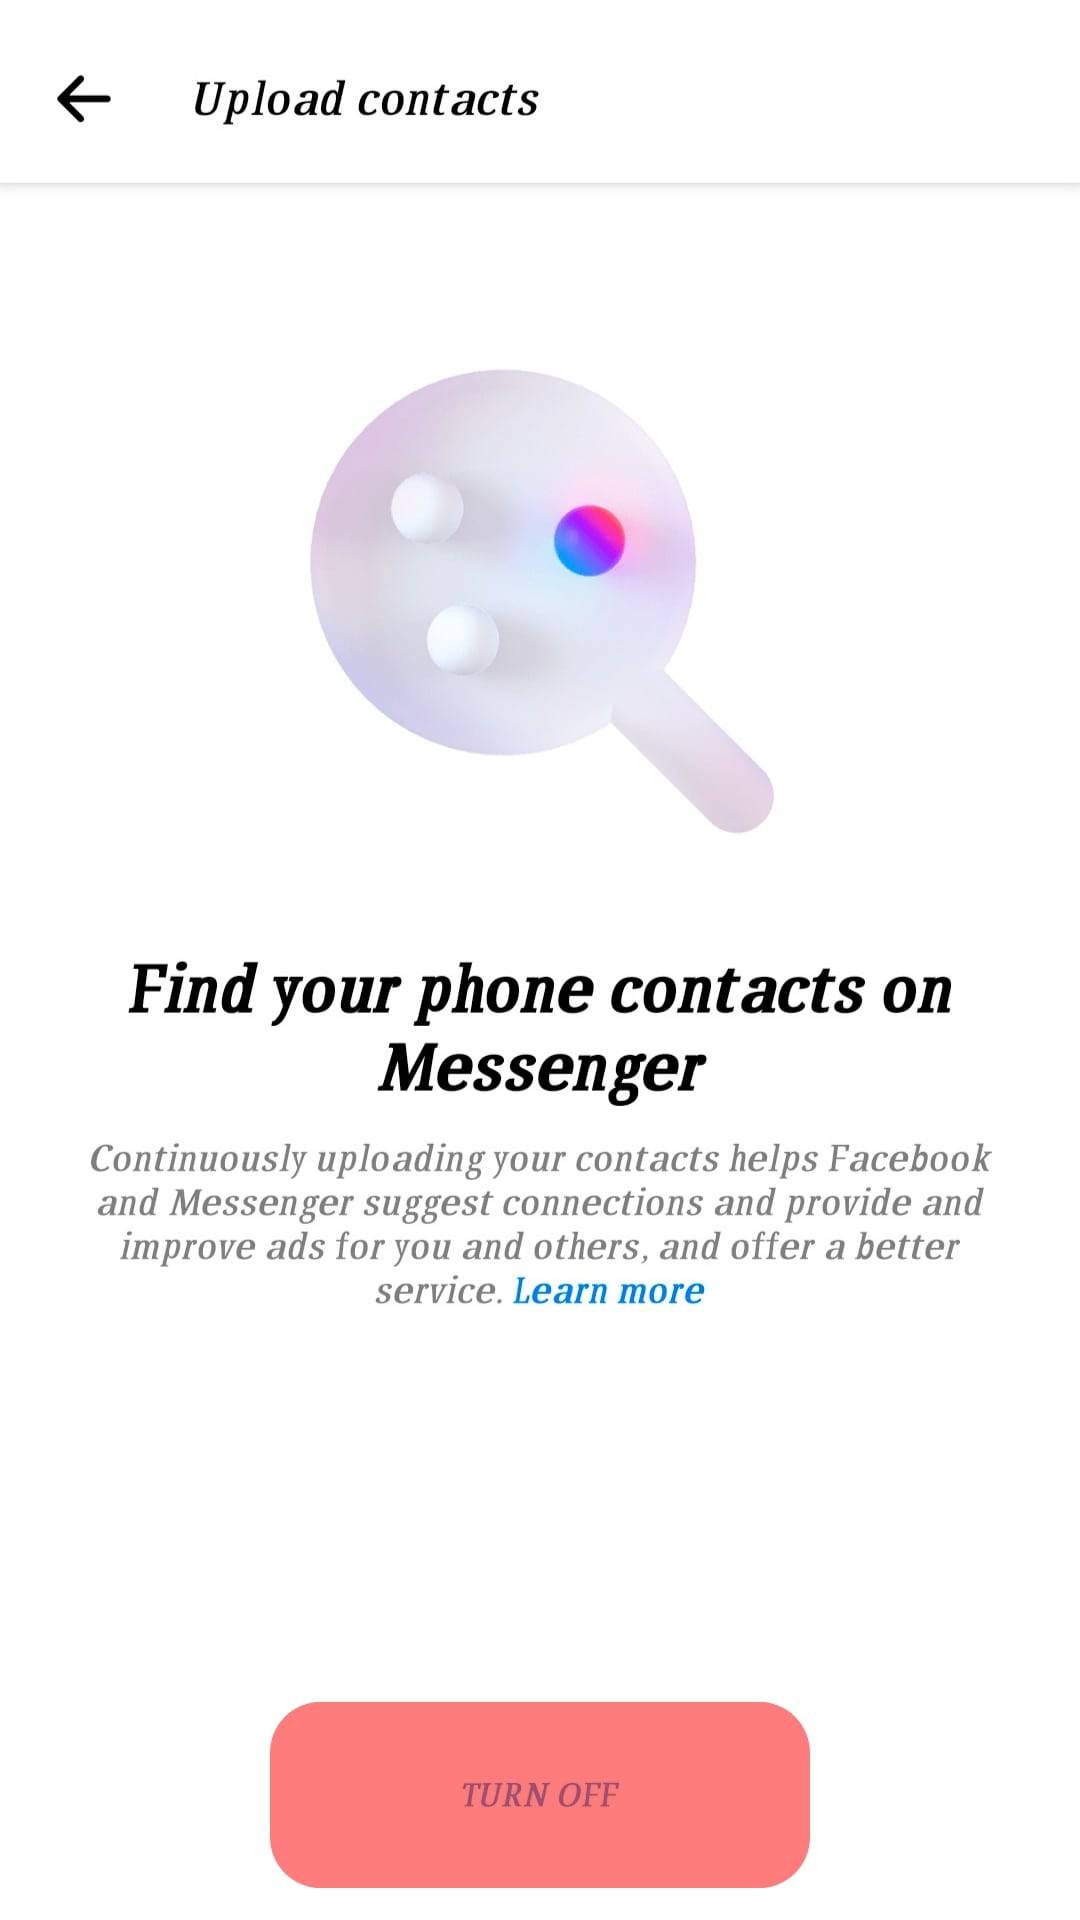 Turn It Off To Prevent Messenger From Sync